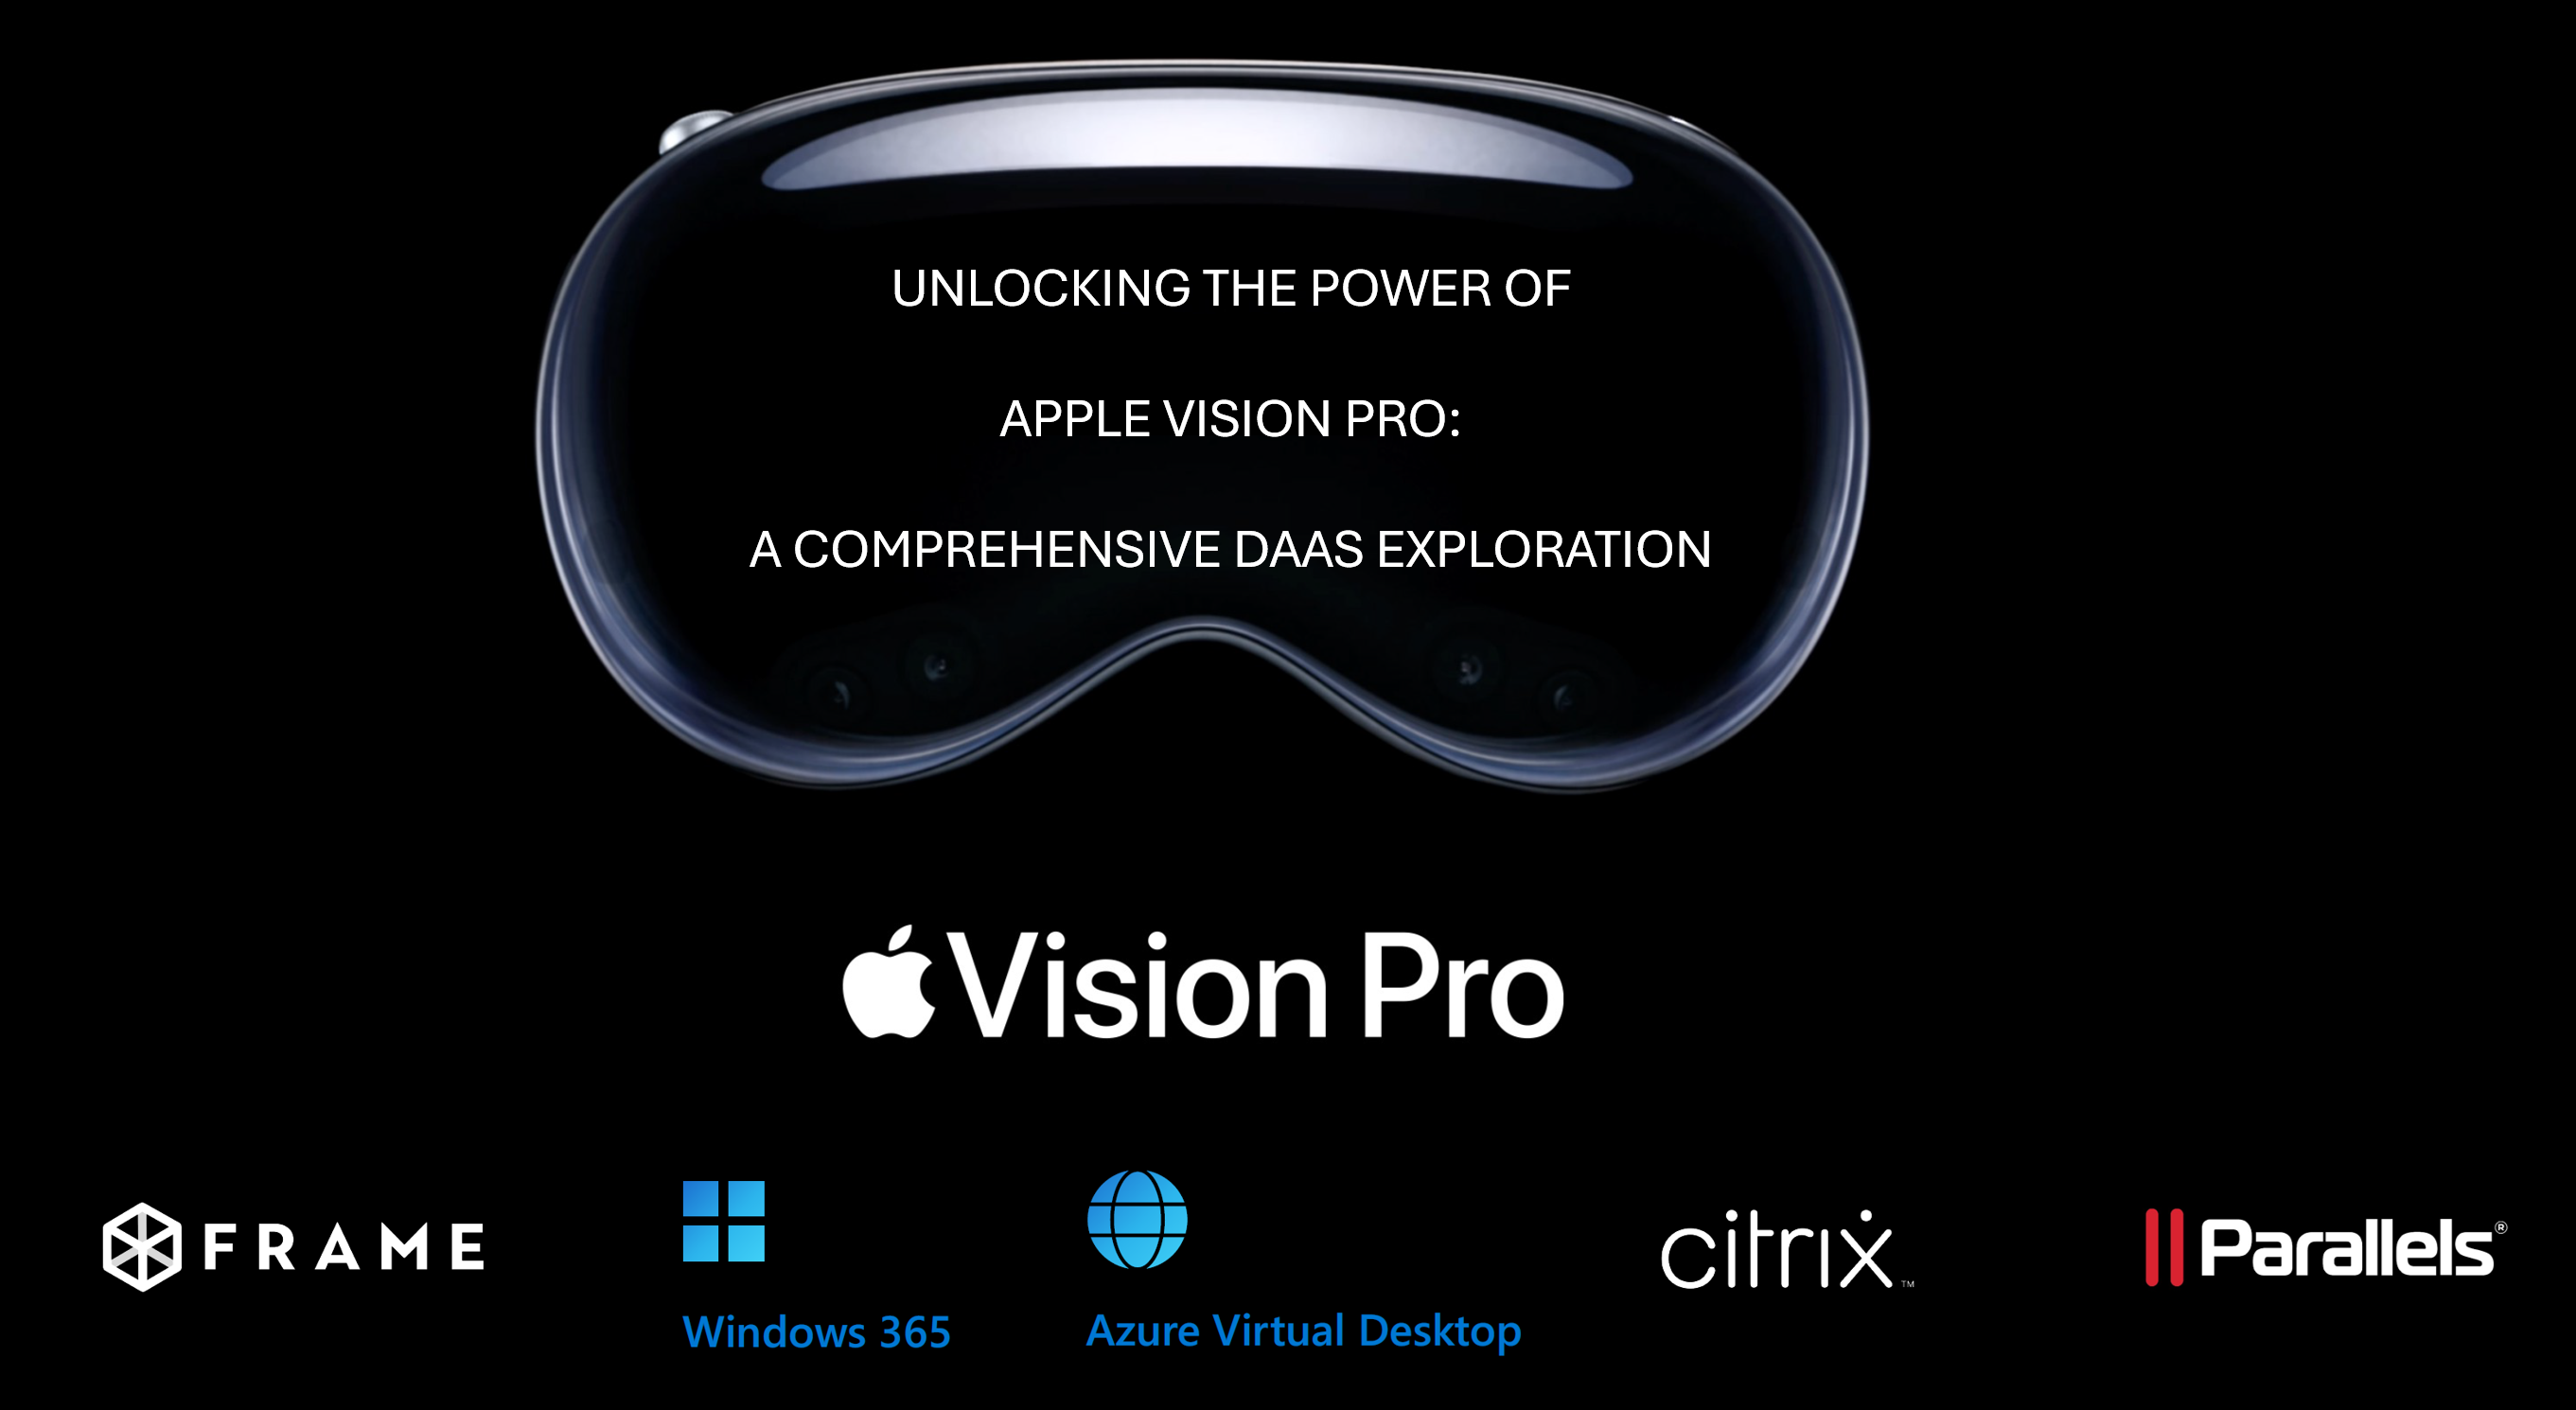 Apple Vision Pro with DaaS